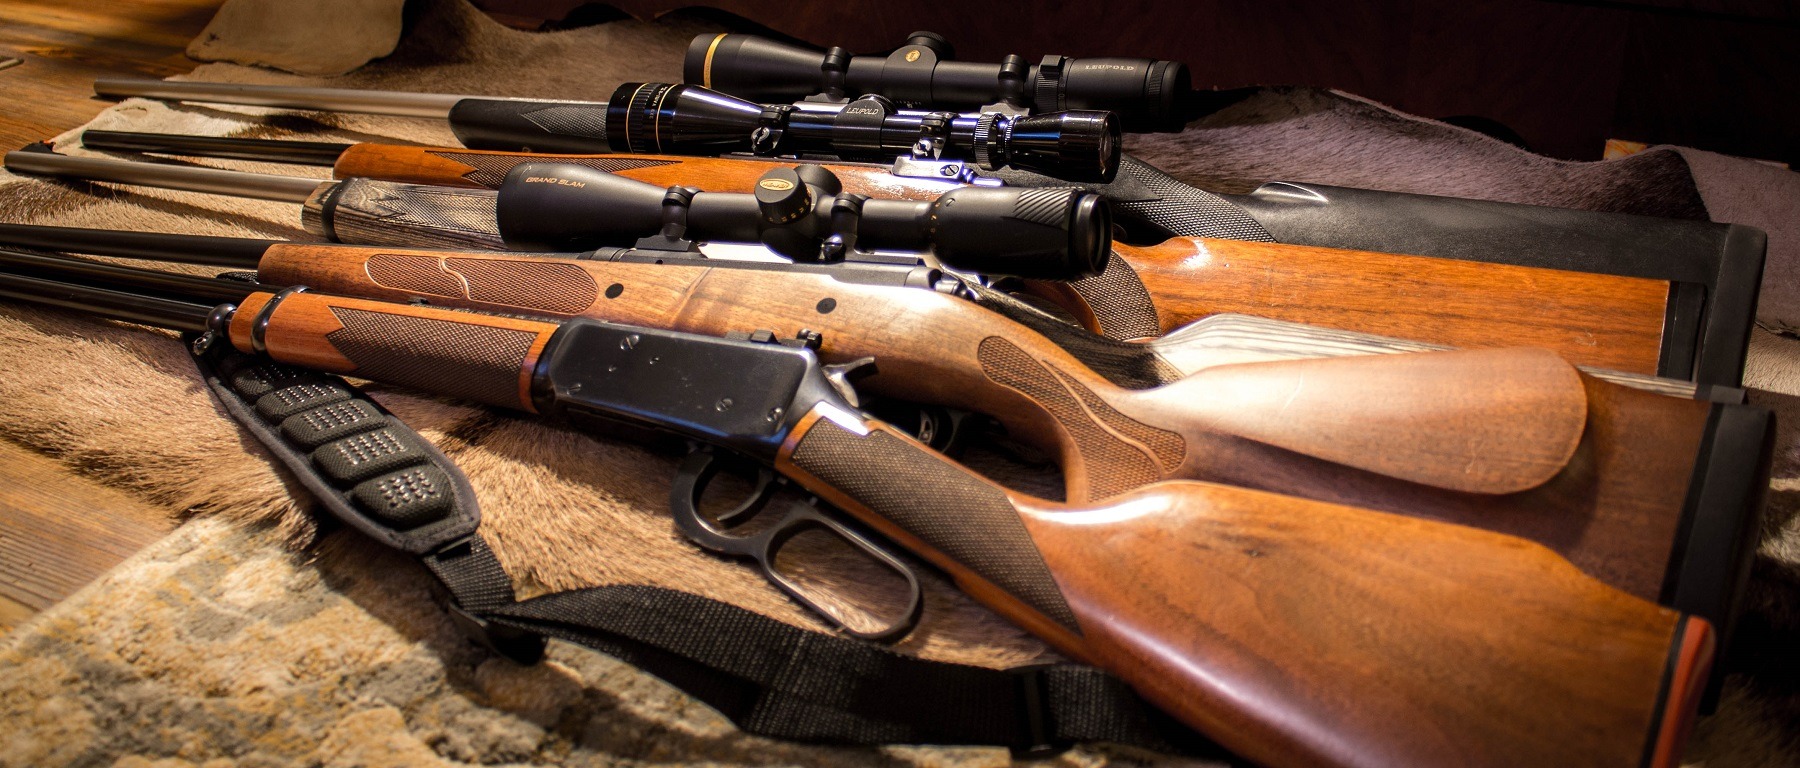 Choosing Your First Deer Rifle - NSSF Let's Go Hunting